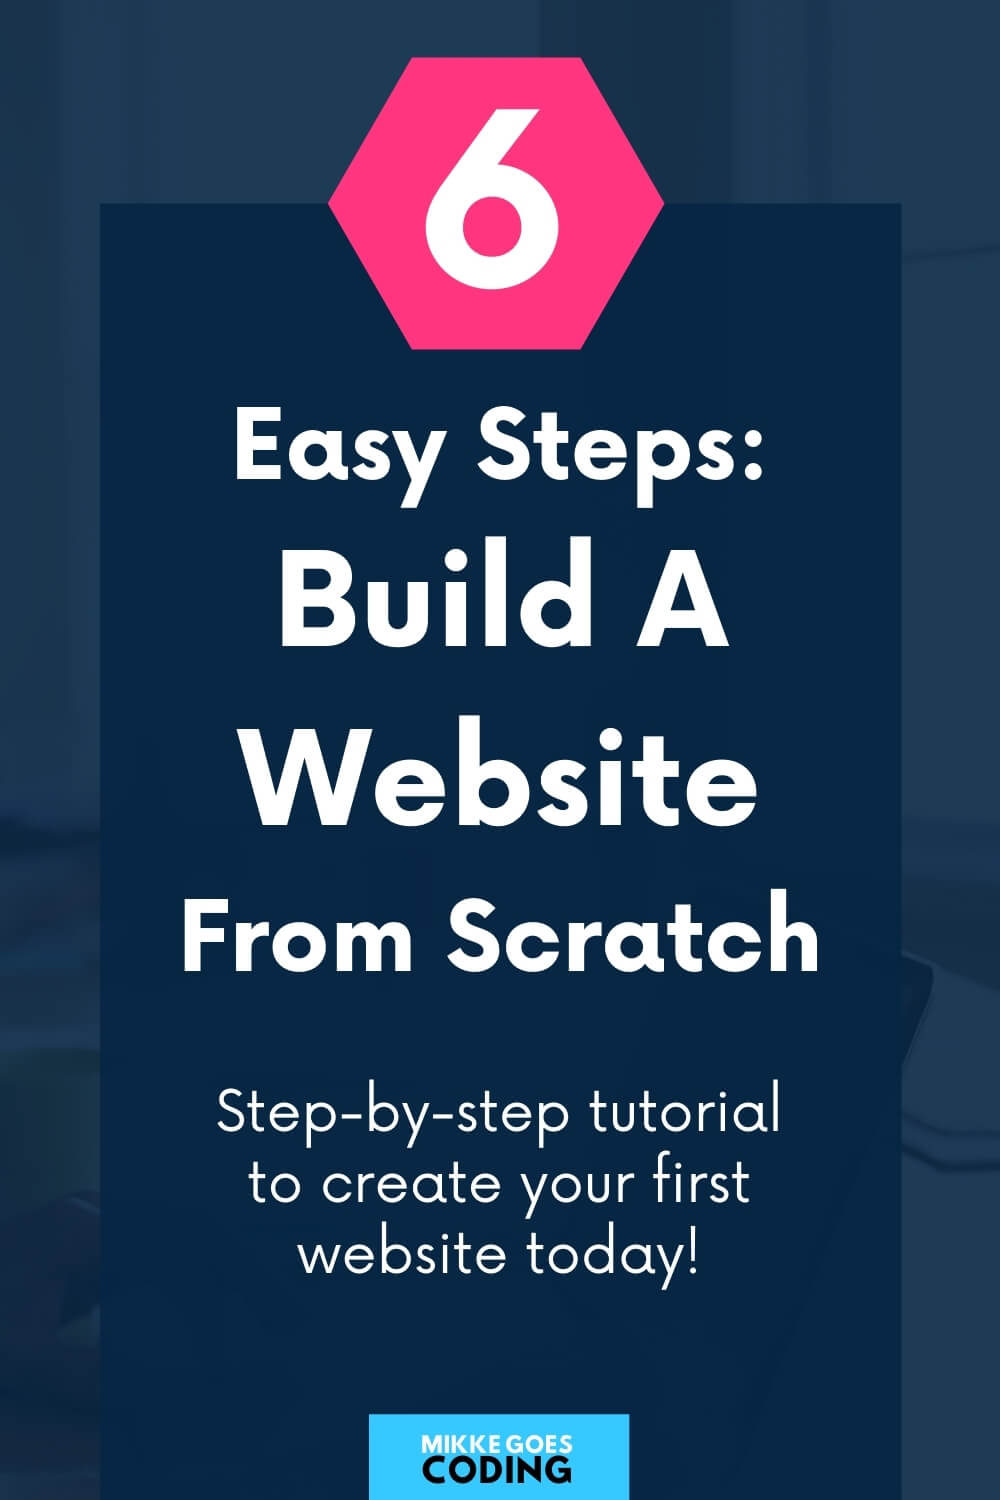 How to build a website from scratch step-by-step